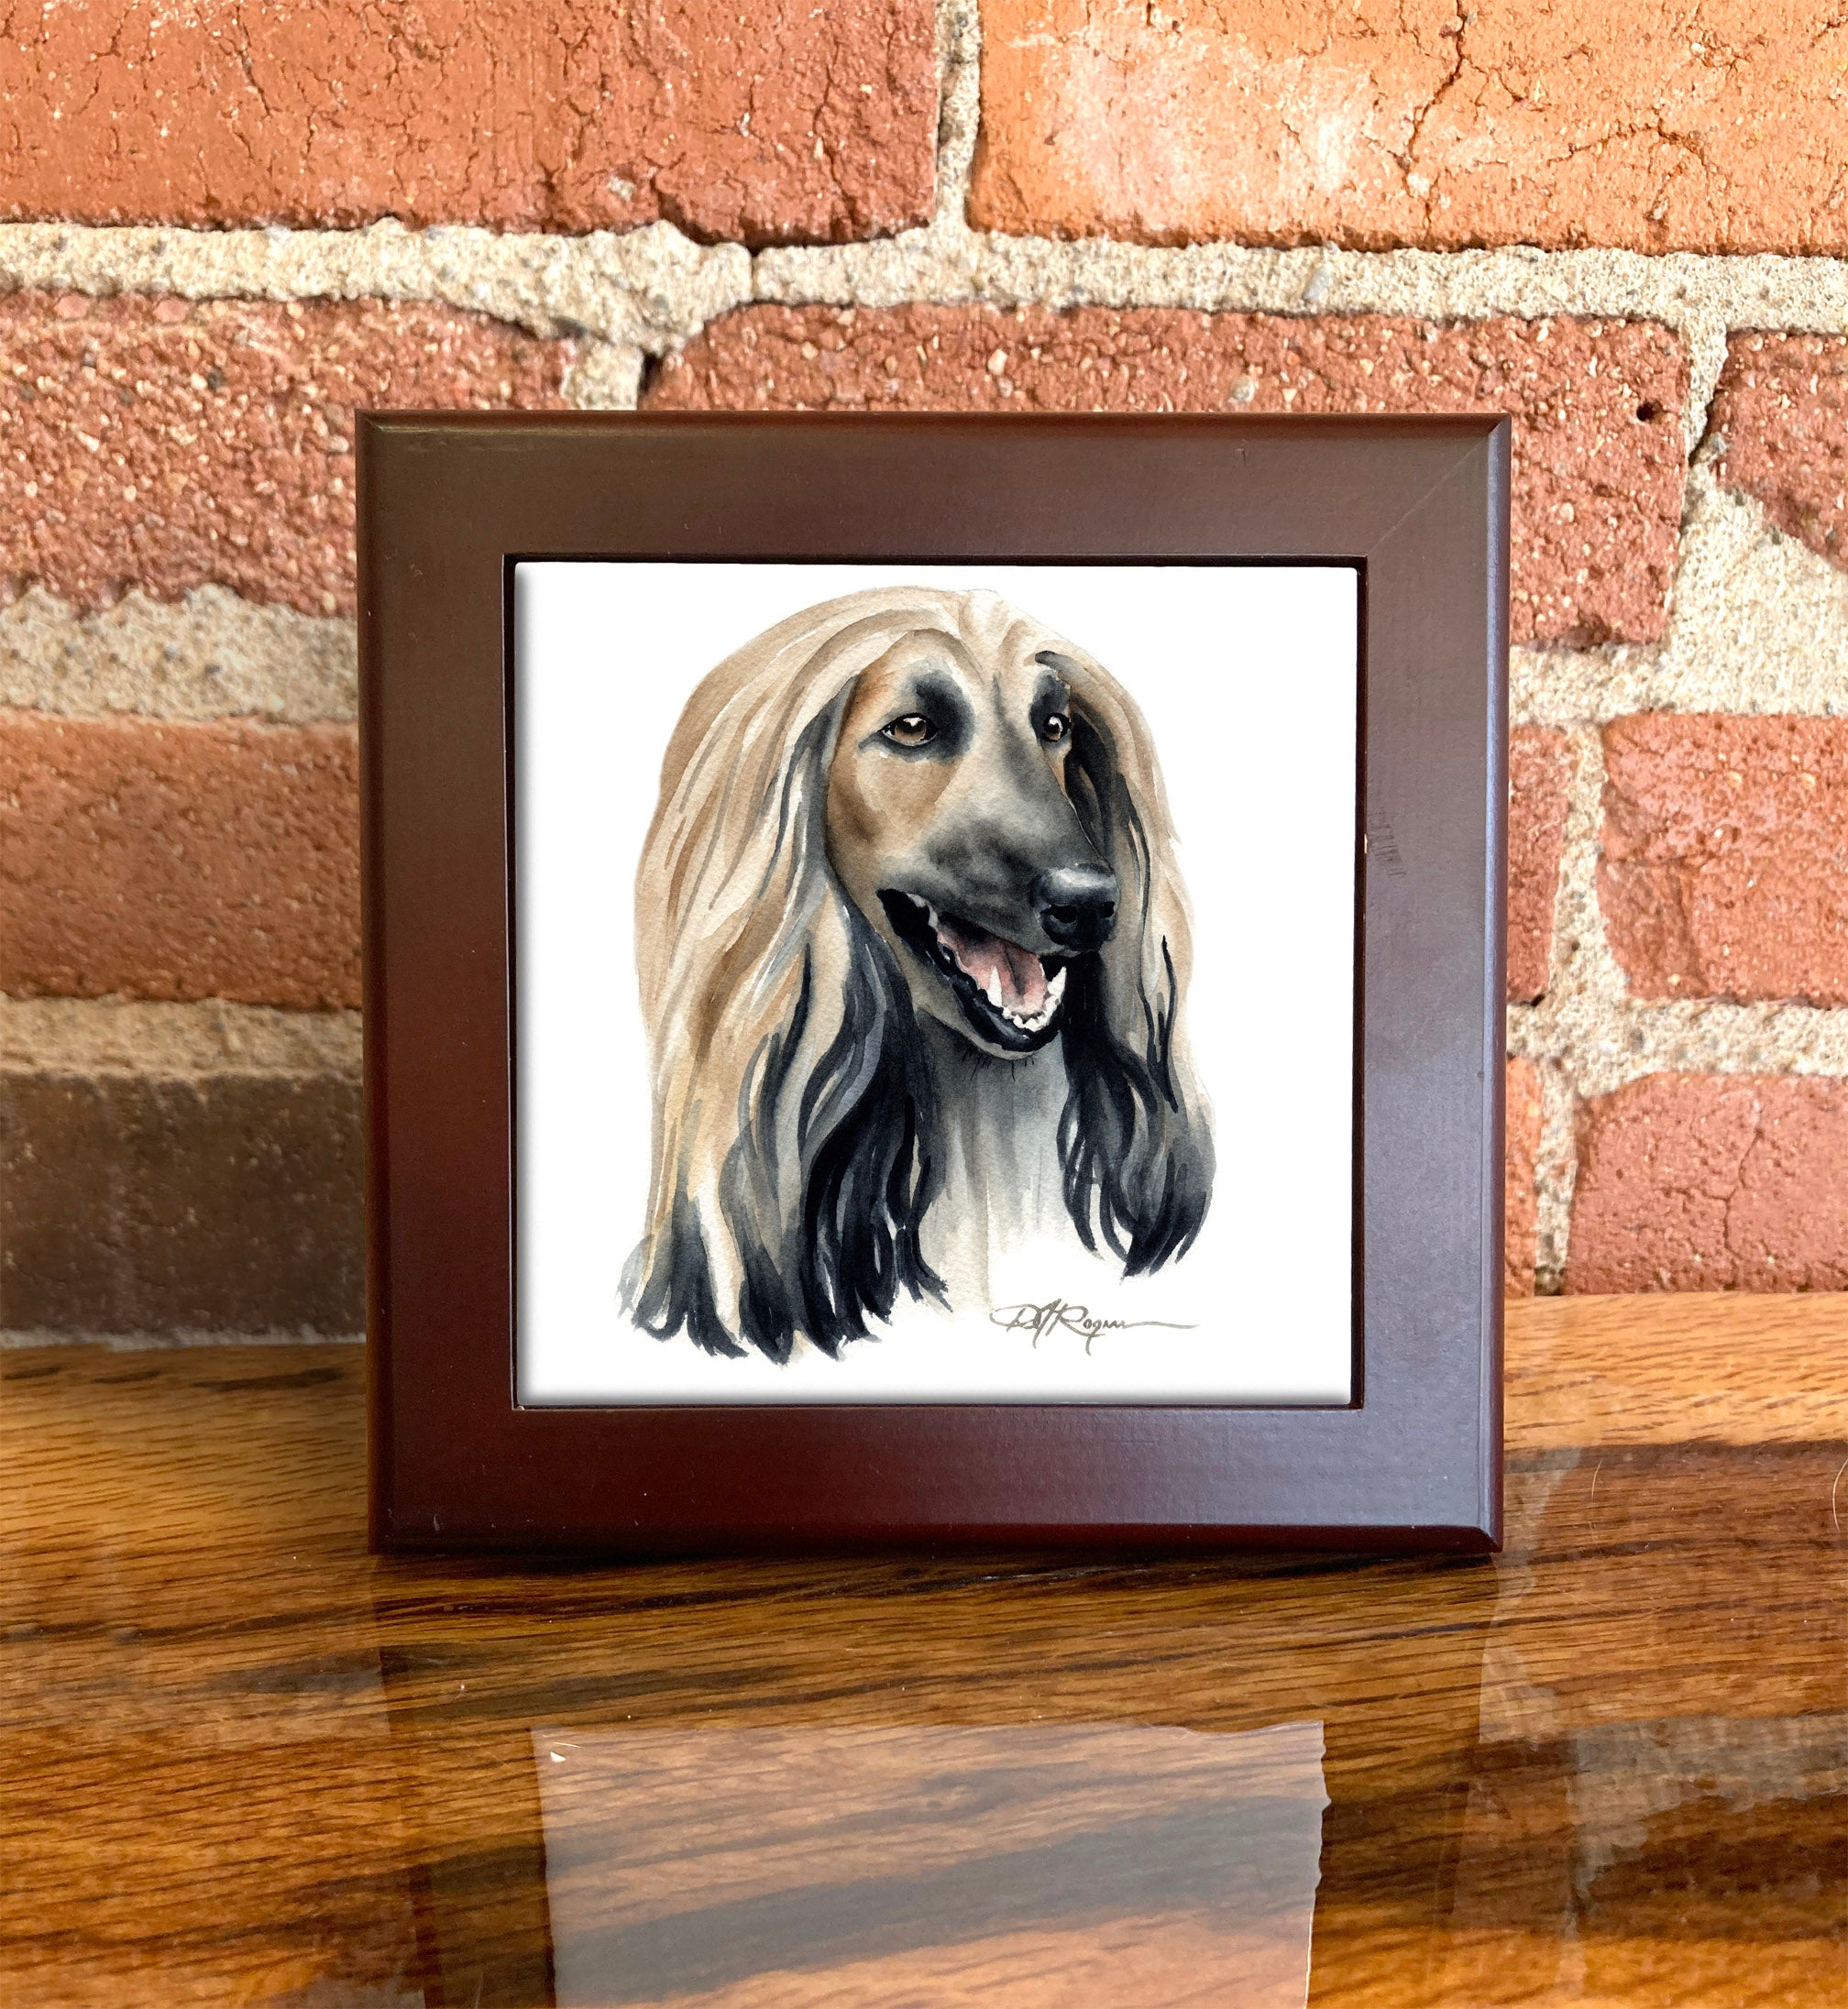 Afghan Hound Traditional Watercolor Dog Art Decorative Tile by Artist DJ Rogers